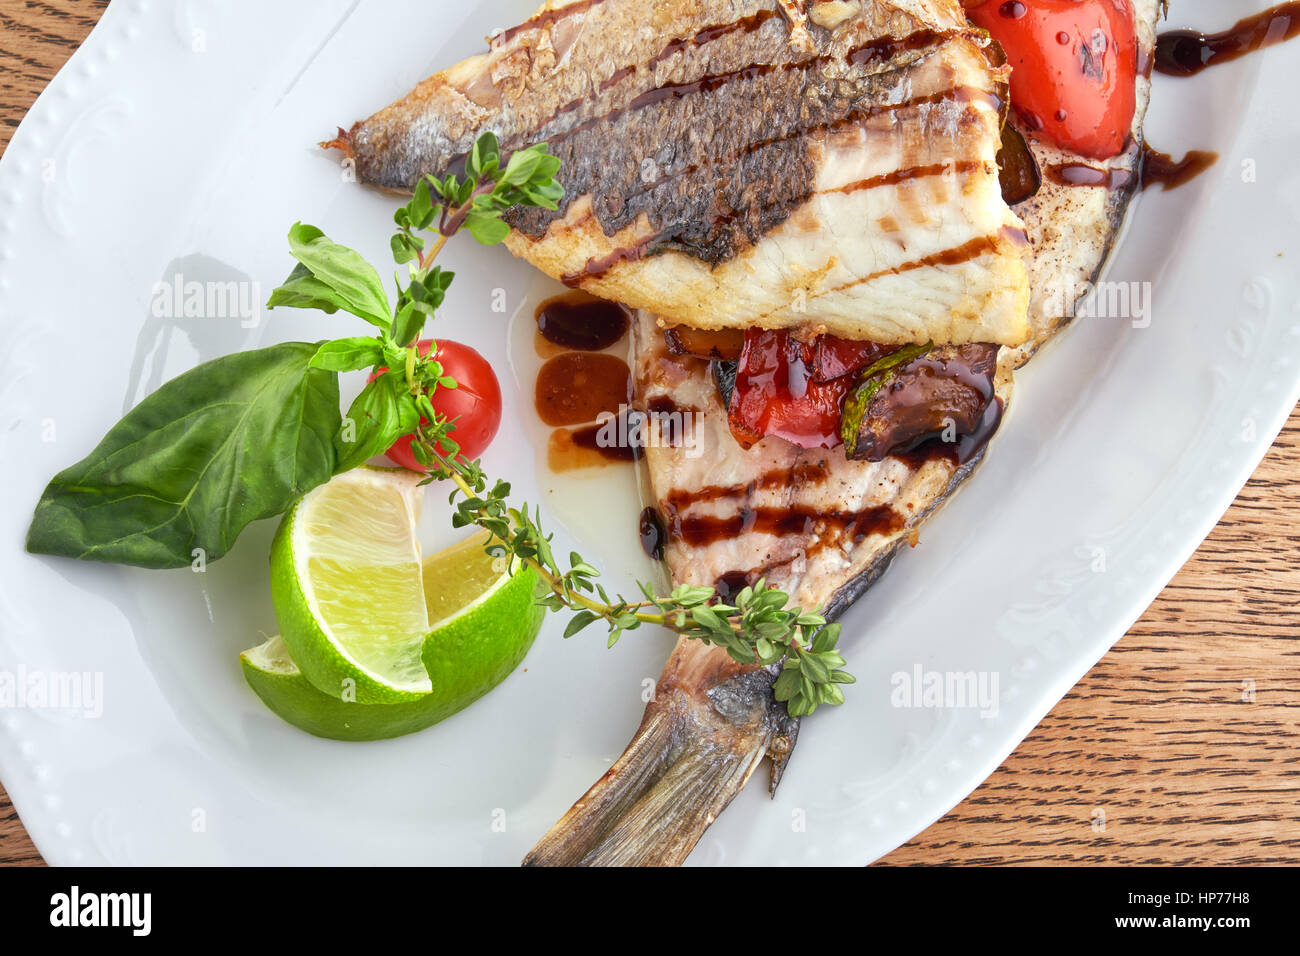 Fried fish on a white plate Stock Photo